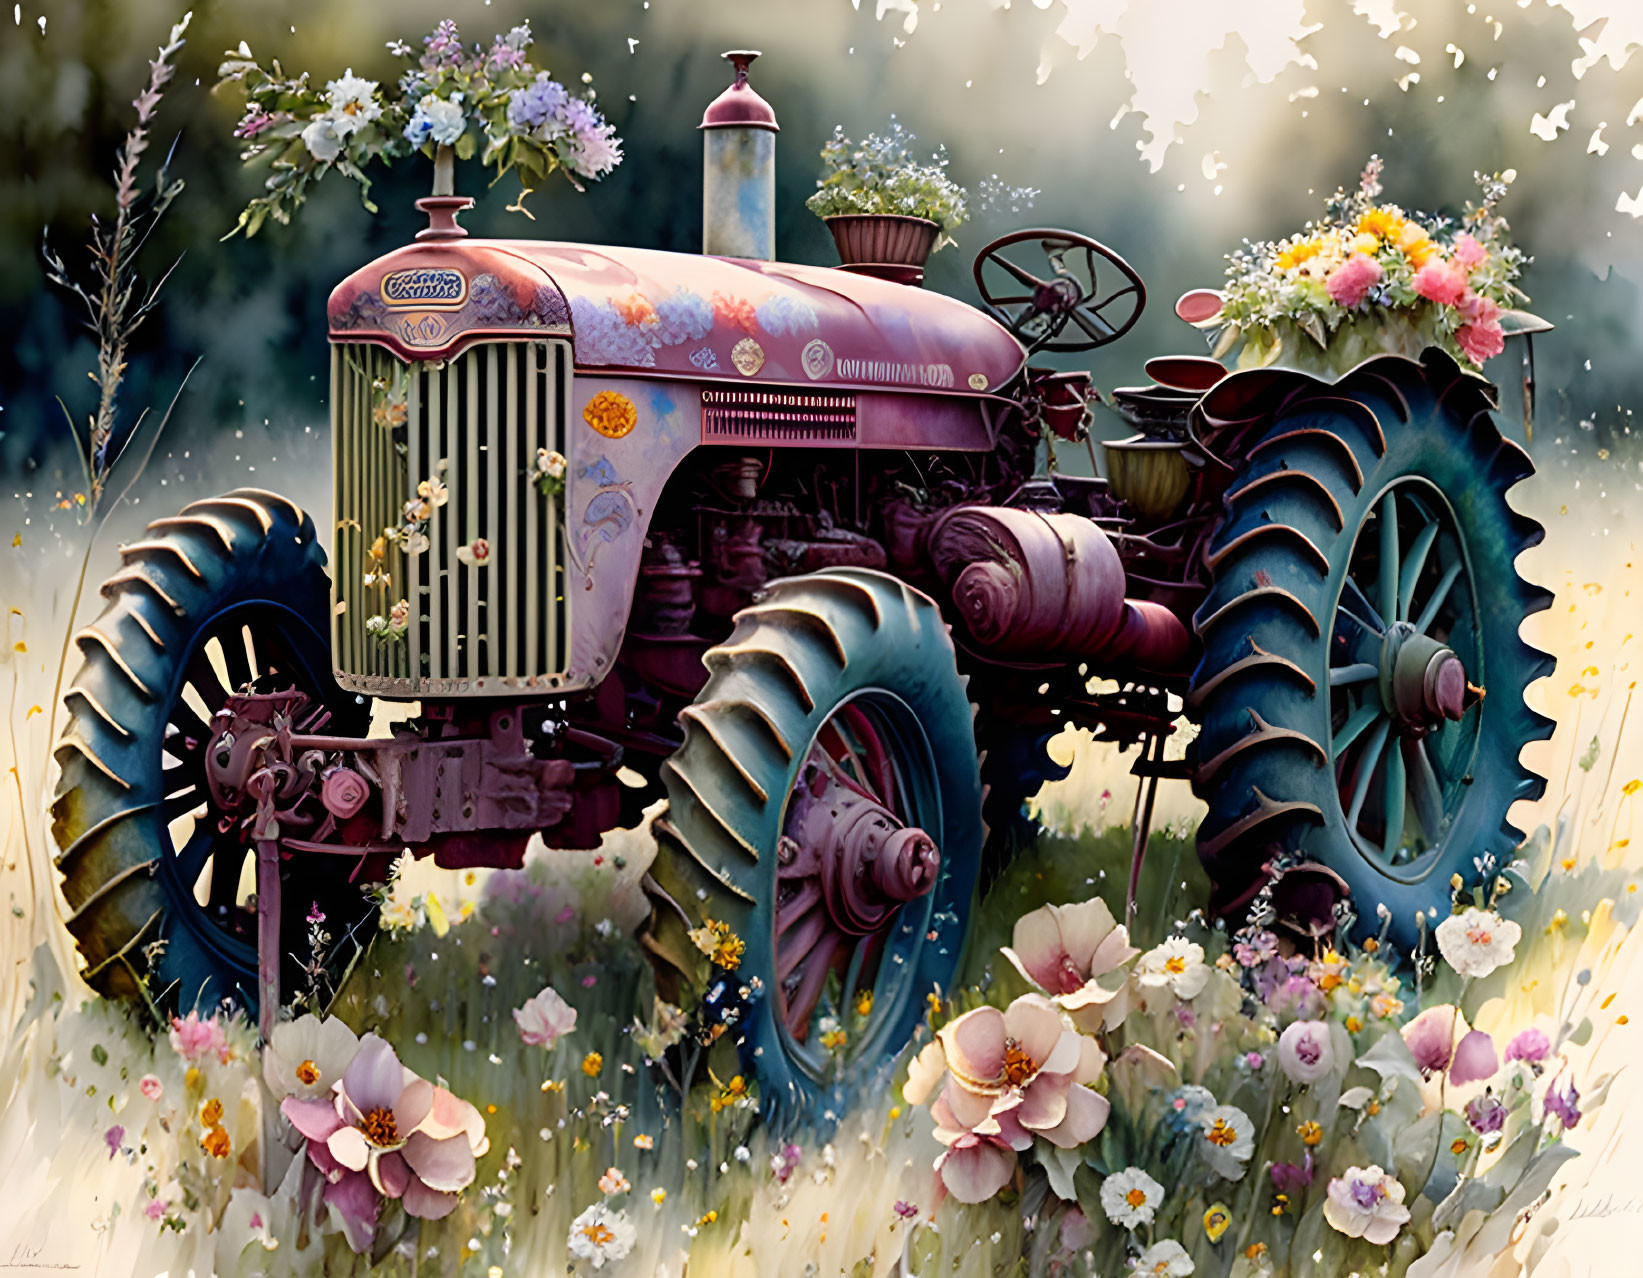 Vintage tractor in vibrant wildflower setting with rustic charm